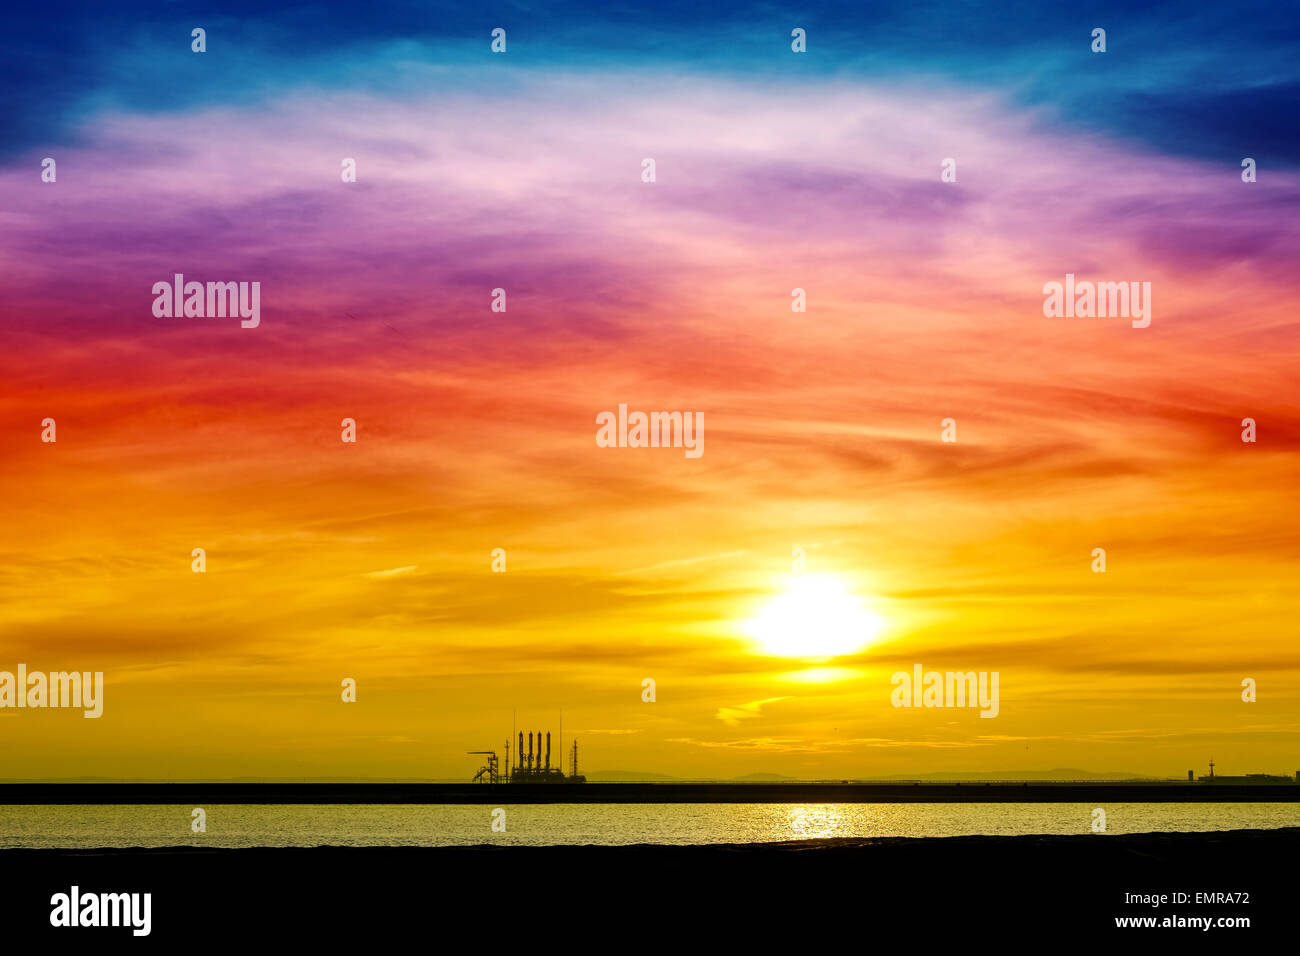 Colorful sunrise over industrial infrastructure in Swinoujscie harbor, Poland. Stock Photo